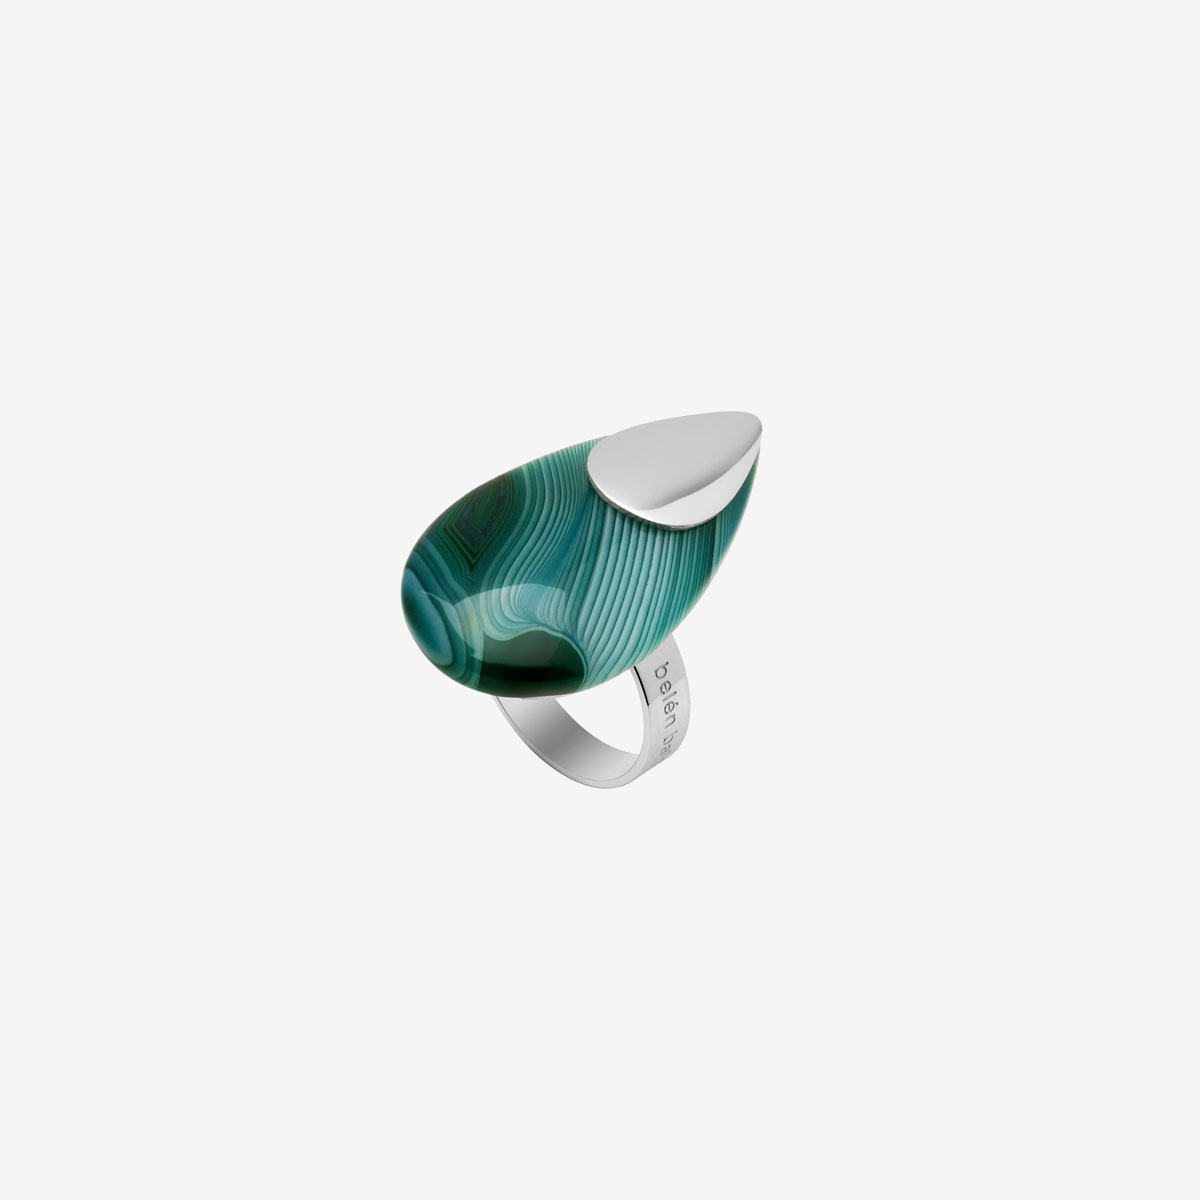 handmade Adi ring in sterling silver and green banded agate designed by Belen Bajo